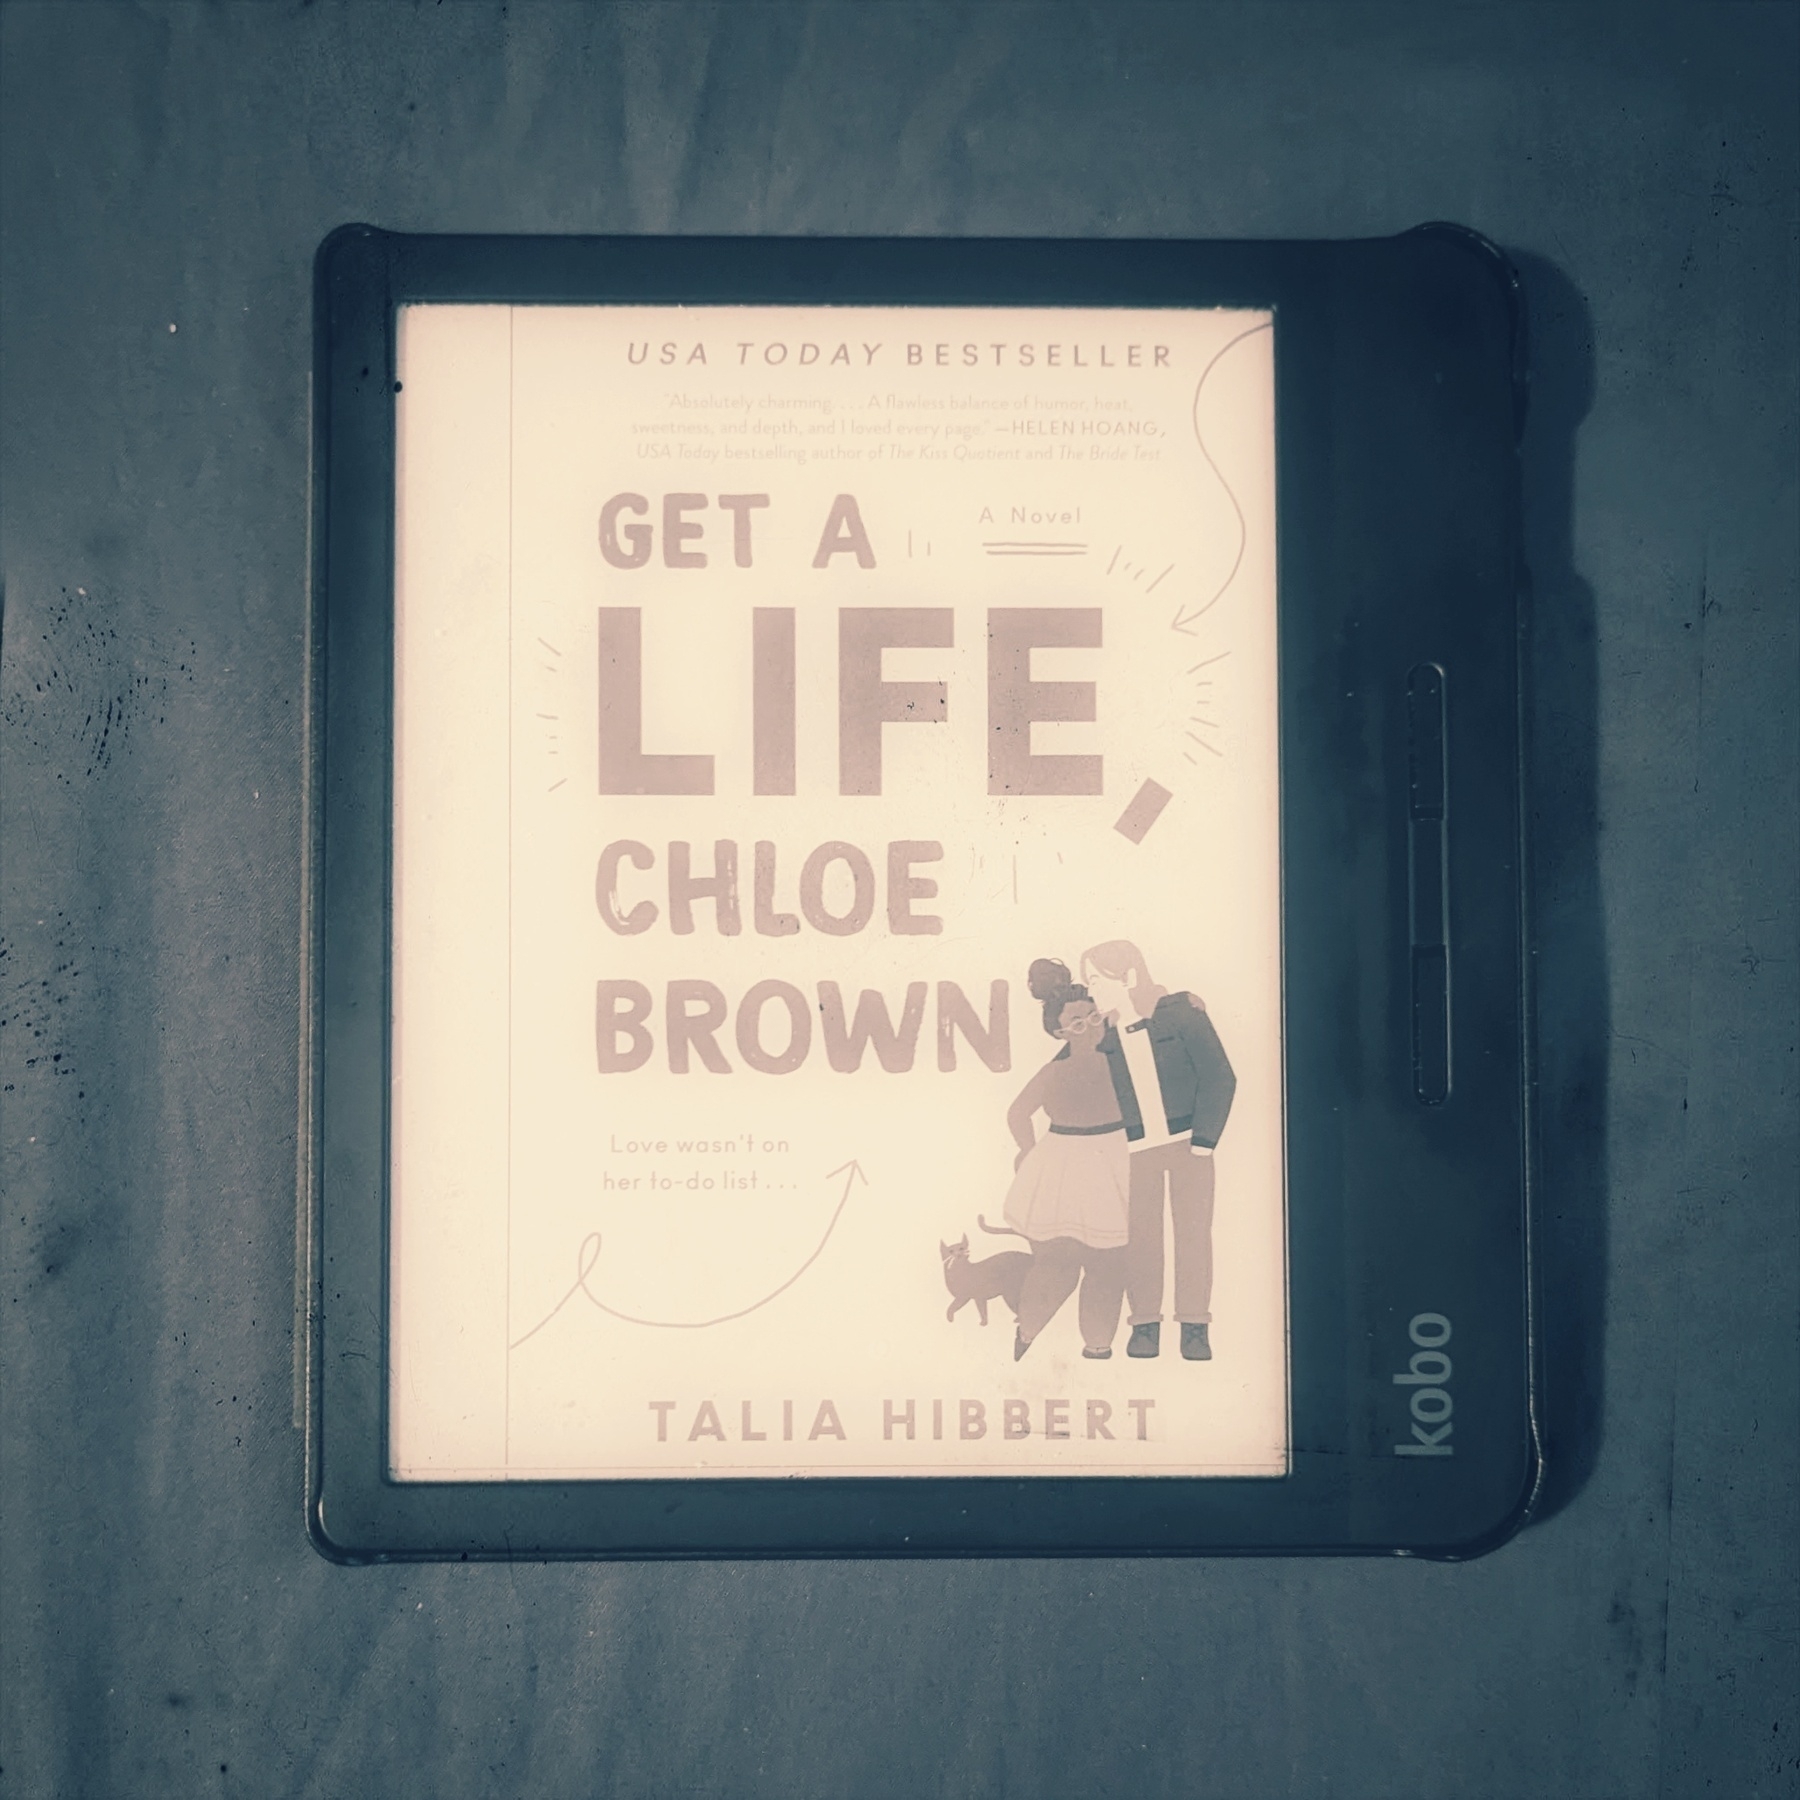 An e-reader displaying the cover of a romance novel by Talia Hibbert, featuring an illustration of two people and a cat. The title is 'Get A Life, Chloe Brown' and it is a USA Today Bestseller.